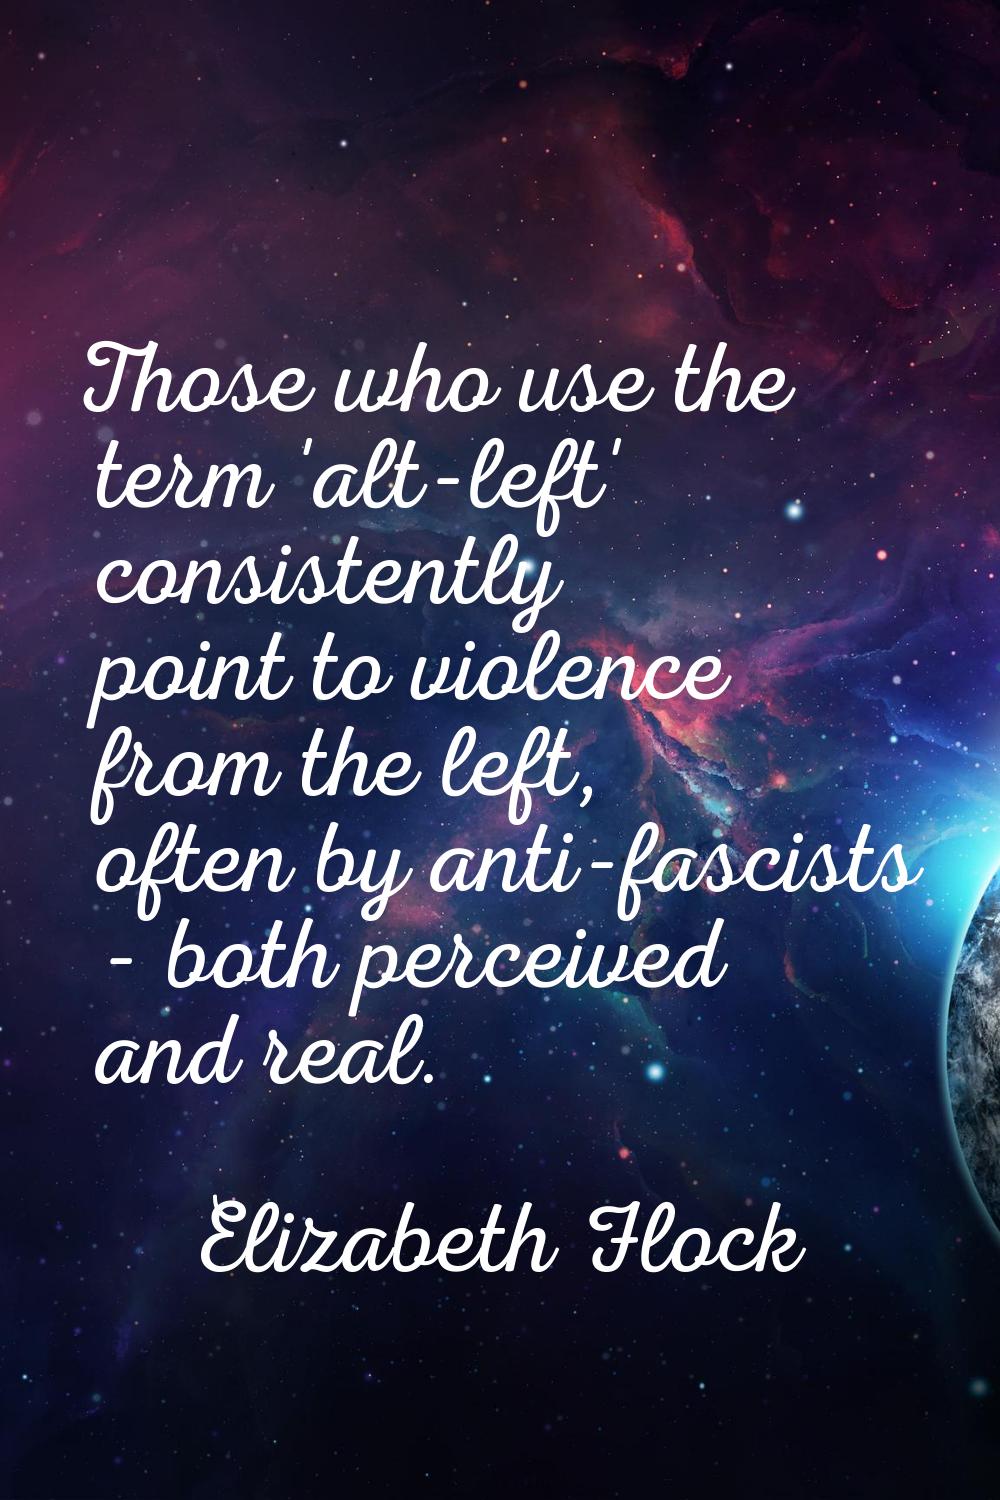 Those who use the term 'alt-left' consistently point to violence from the left, often by anti-fasci